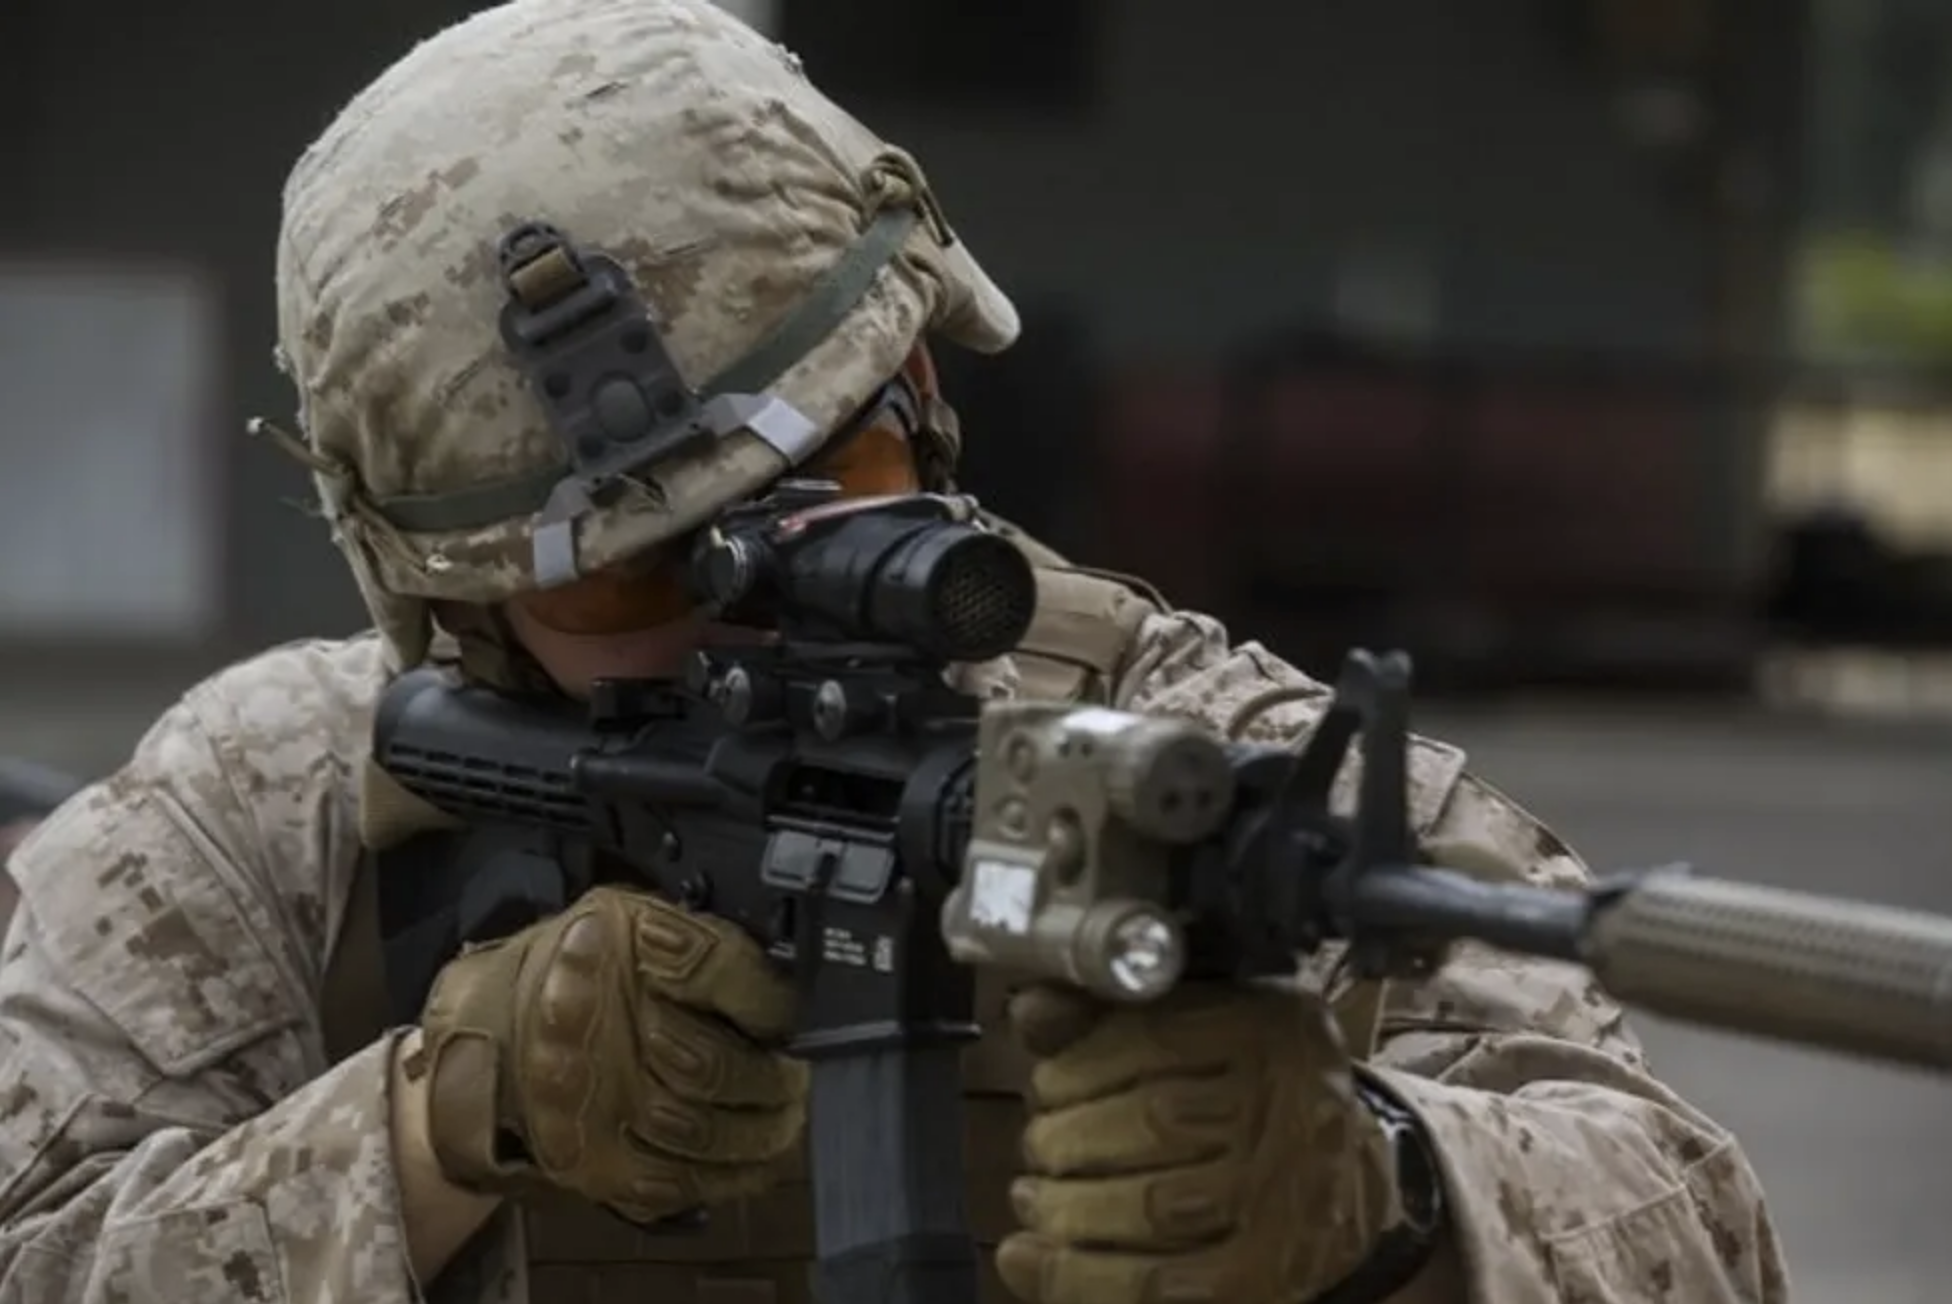 A service member aims a firearm with a suppressor.